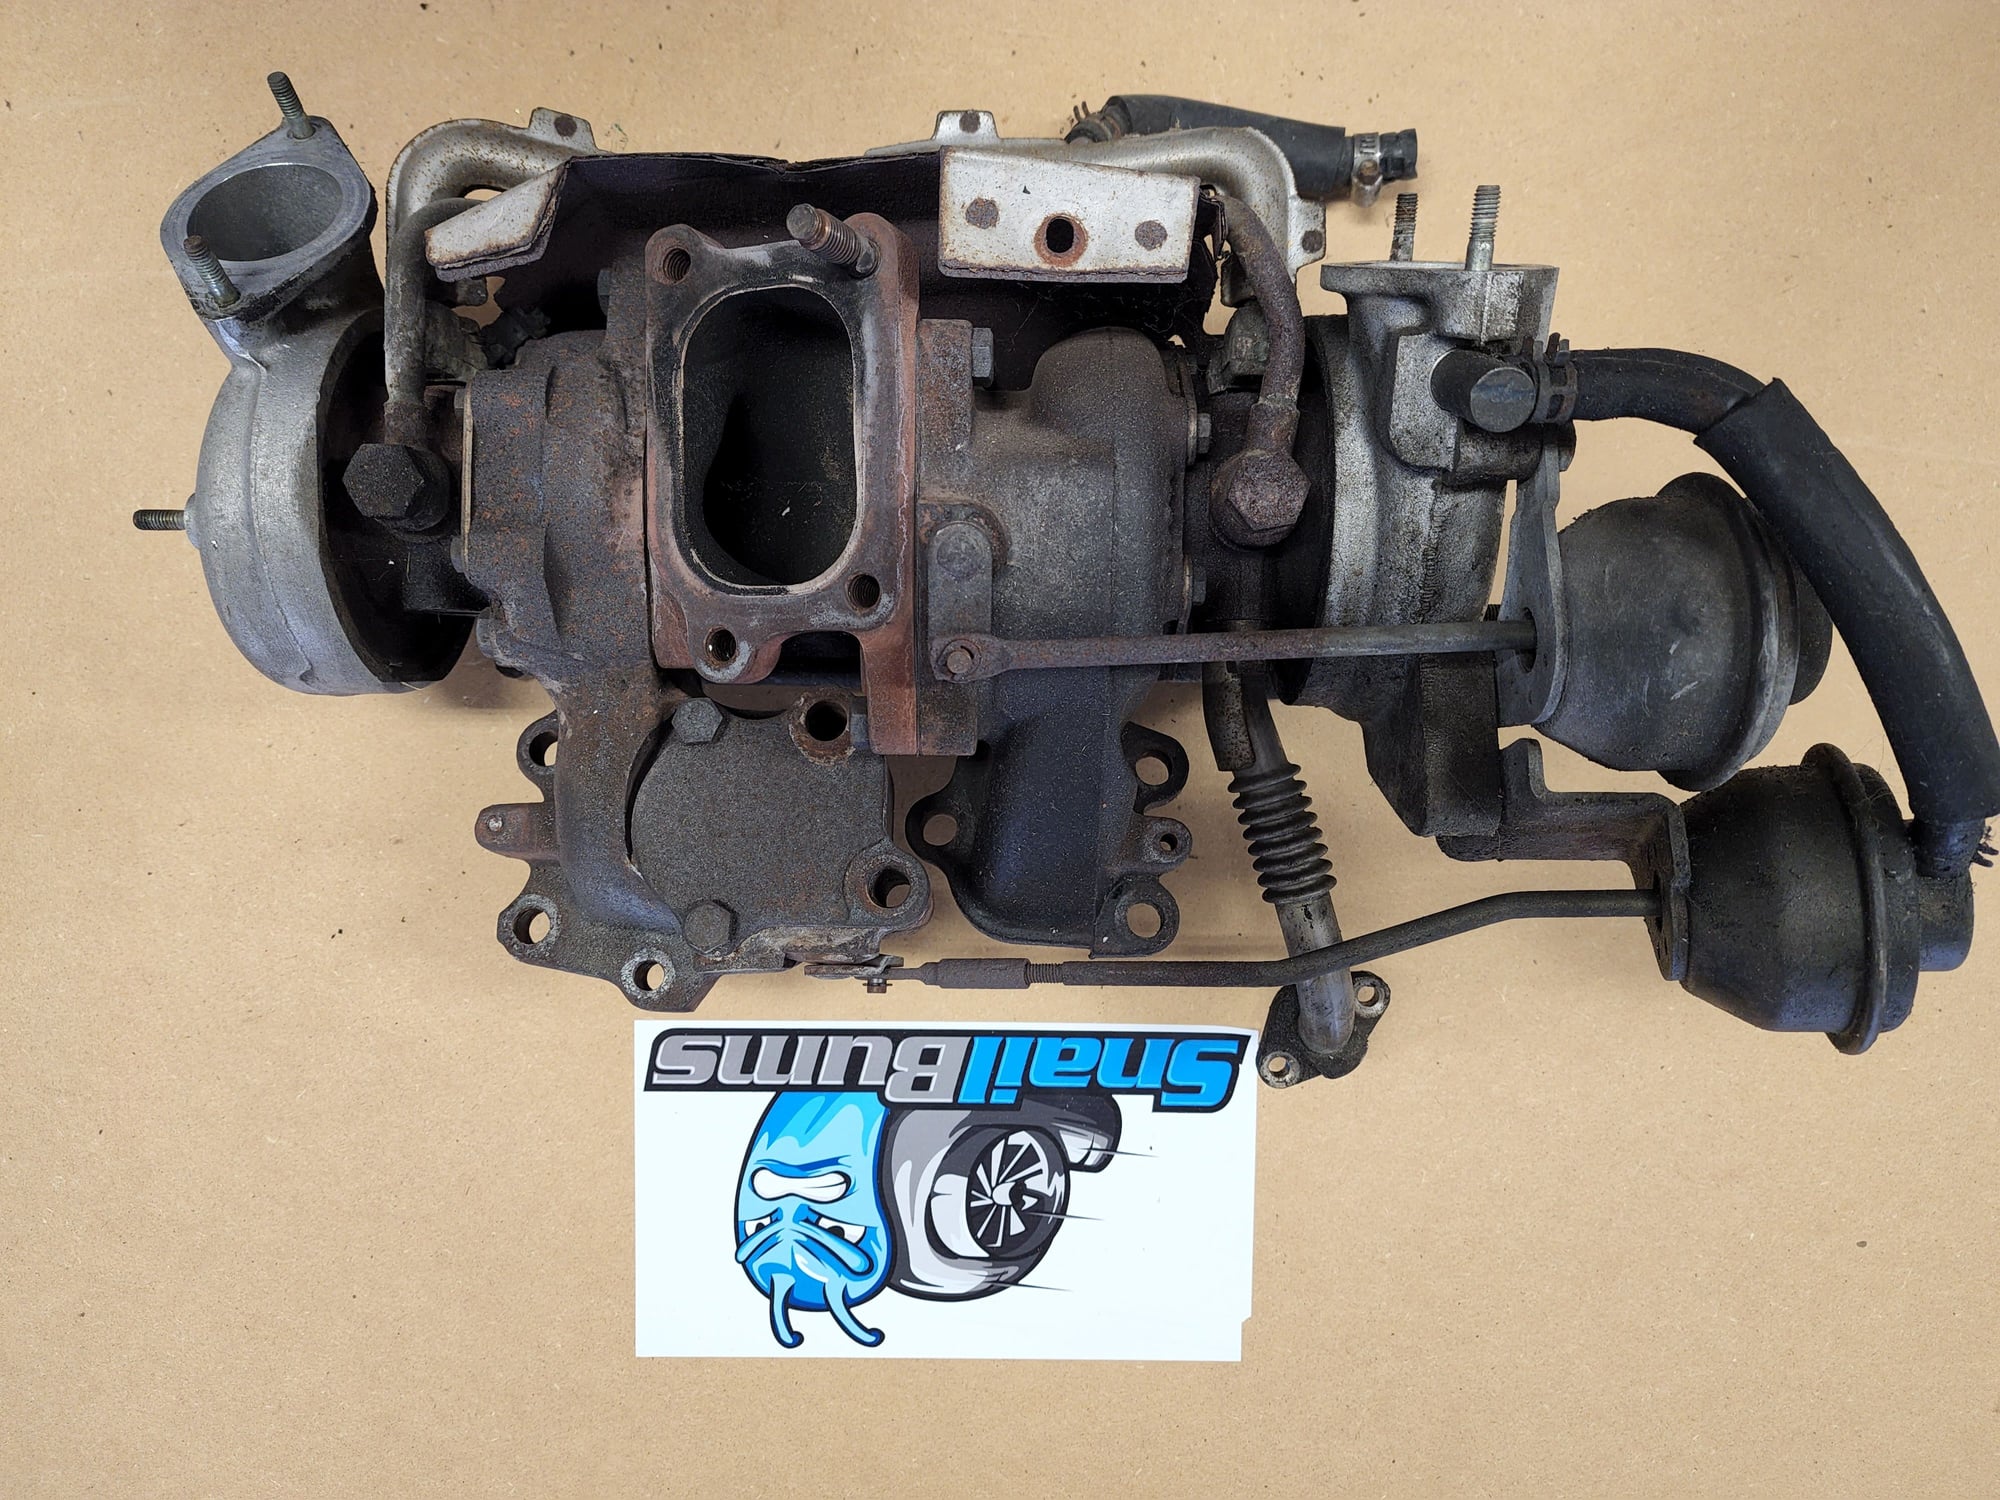 Accessories - twin turbos, twin Power, and random parts for sale. - Used - 1993 to 1995 Mazda RX-7 - Homer Glen, IL 60491, United States